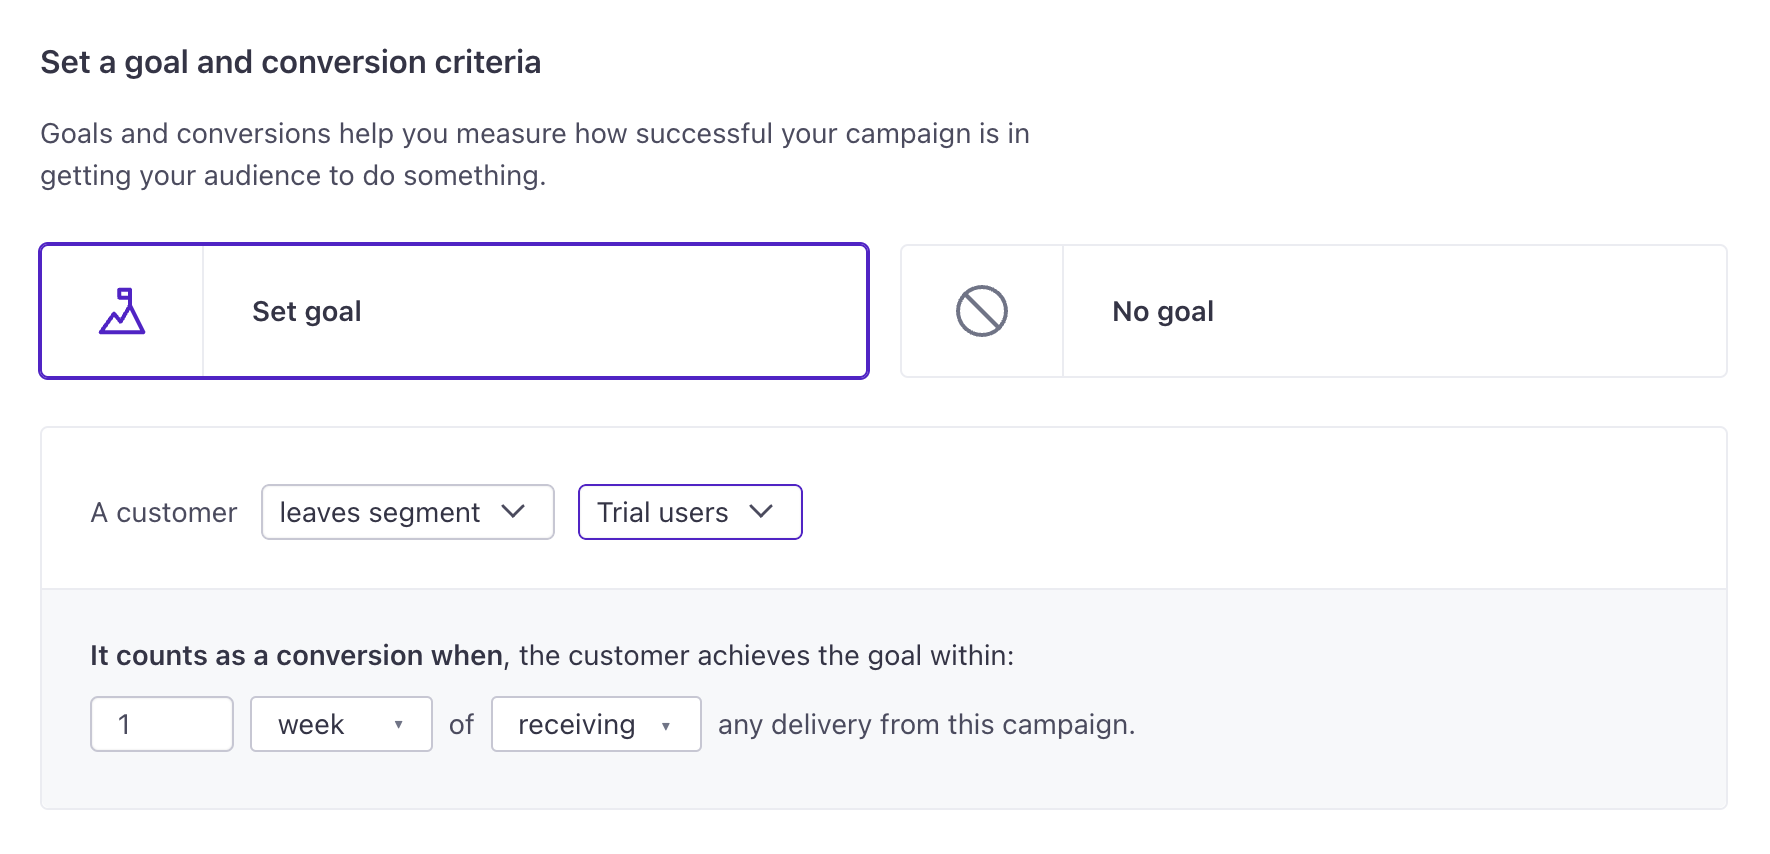 Set goal is selected at the top instead of No goal. Under that, the goal is defined as when a customer leaves the segment: Trial users. It counts as a conversion when the customer achieves the goal within 1 week of receiving any delivery from this campaign.